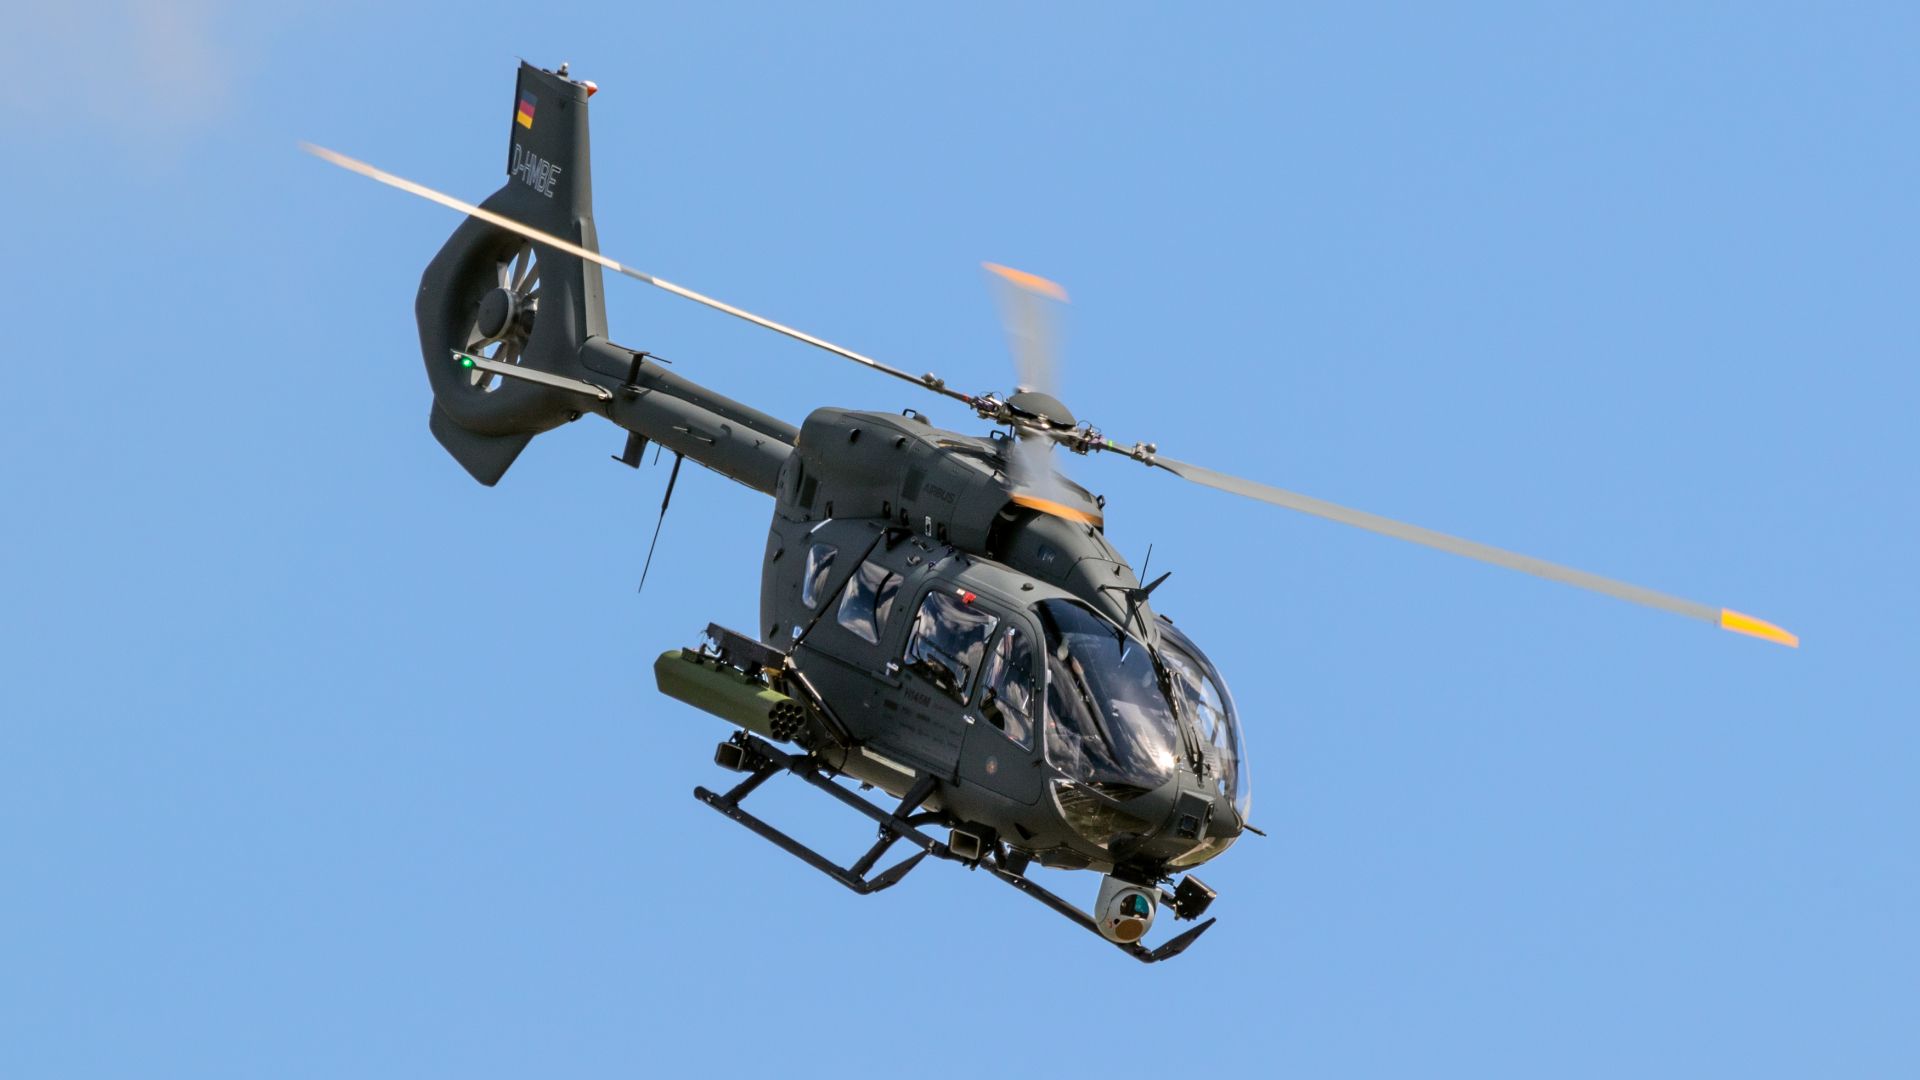 An Airbus H145M military helicopter in the air